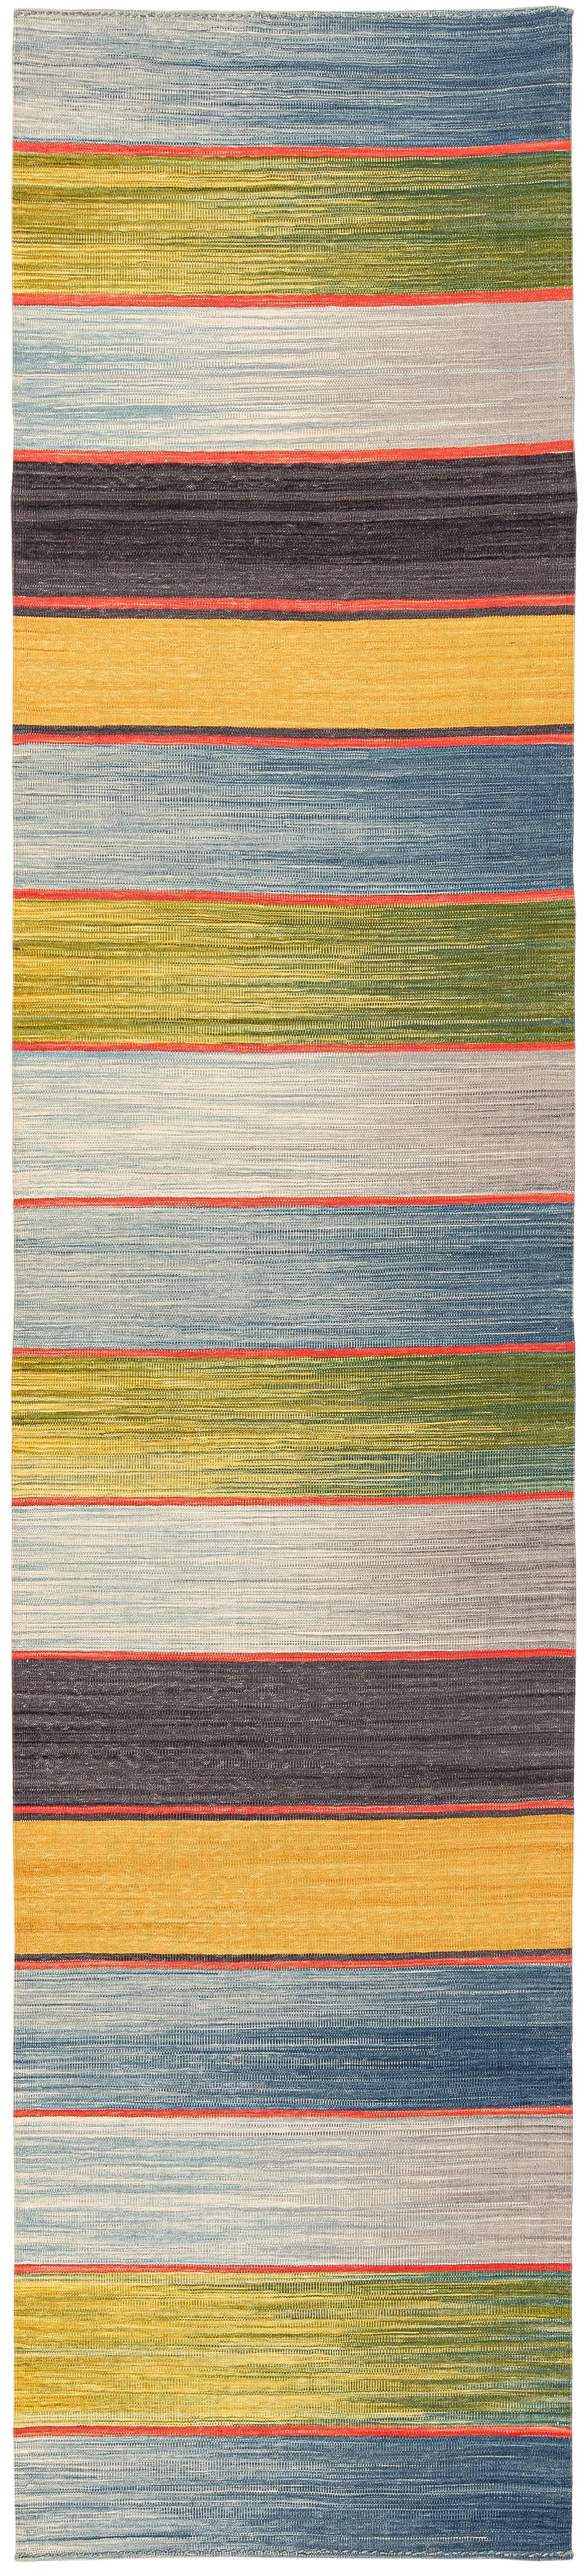 Our Mazandaran Collection highlights the minimalist sophistication that existed long before the modern era. These rugs are inspired by the kilims that were woven by Persian women in the Mazandaran Province in central-northern Iran just below the